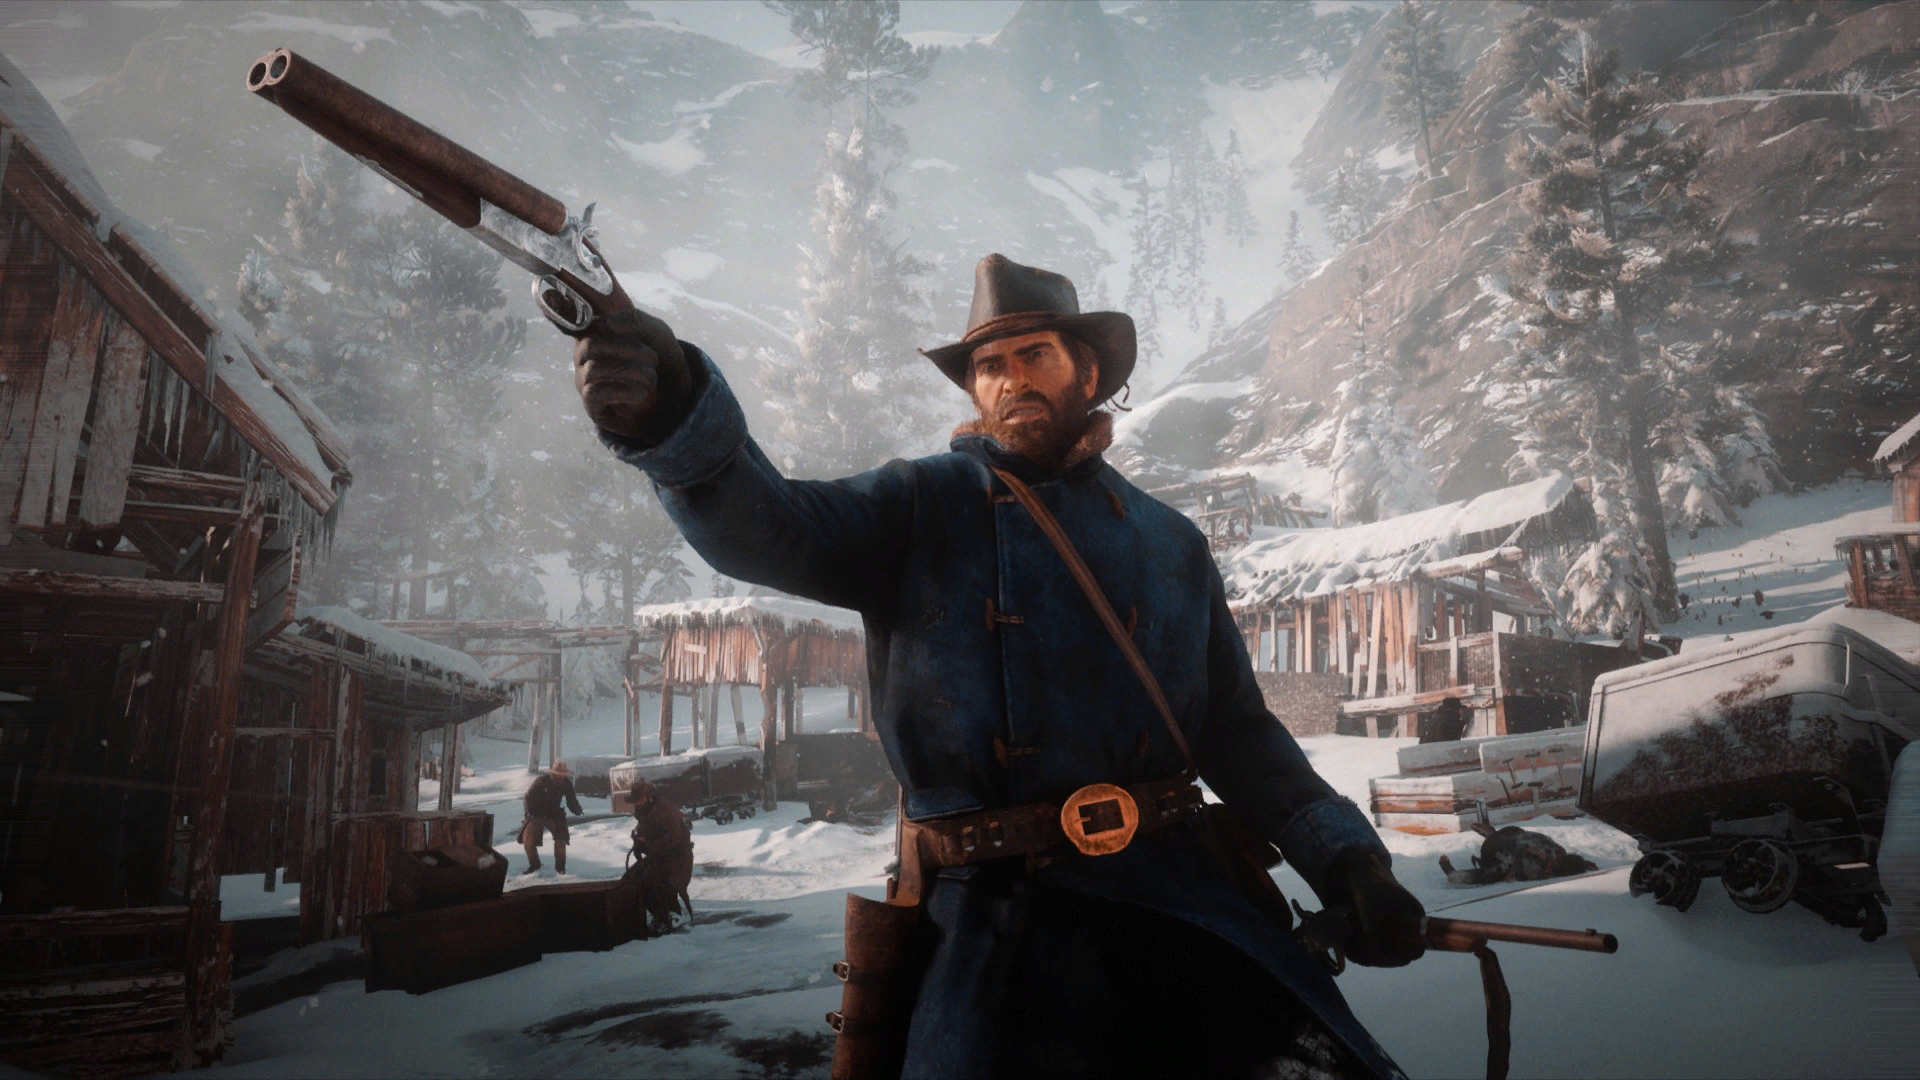 Ред дем 2. Red Dead Redemption 2. Red Dead Redemption 2 (PC). Red Dead Red Dead Redemption 2.